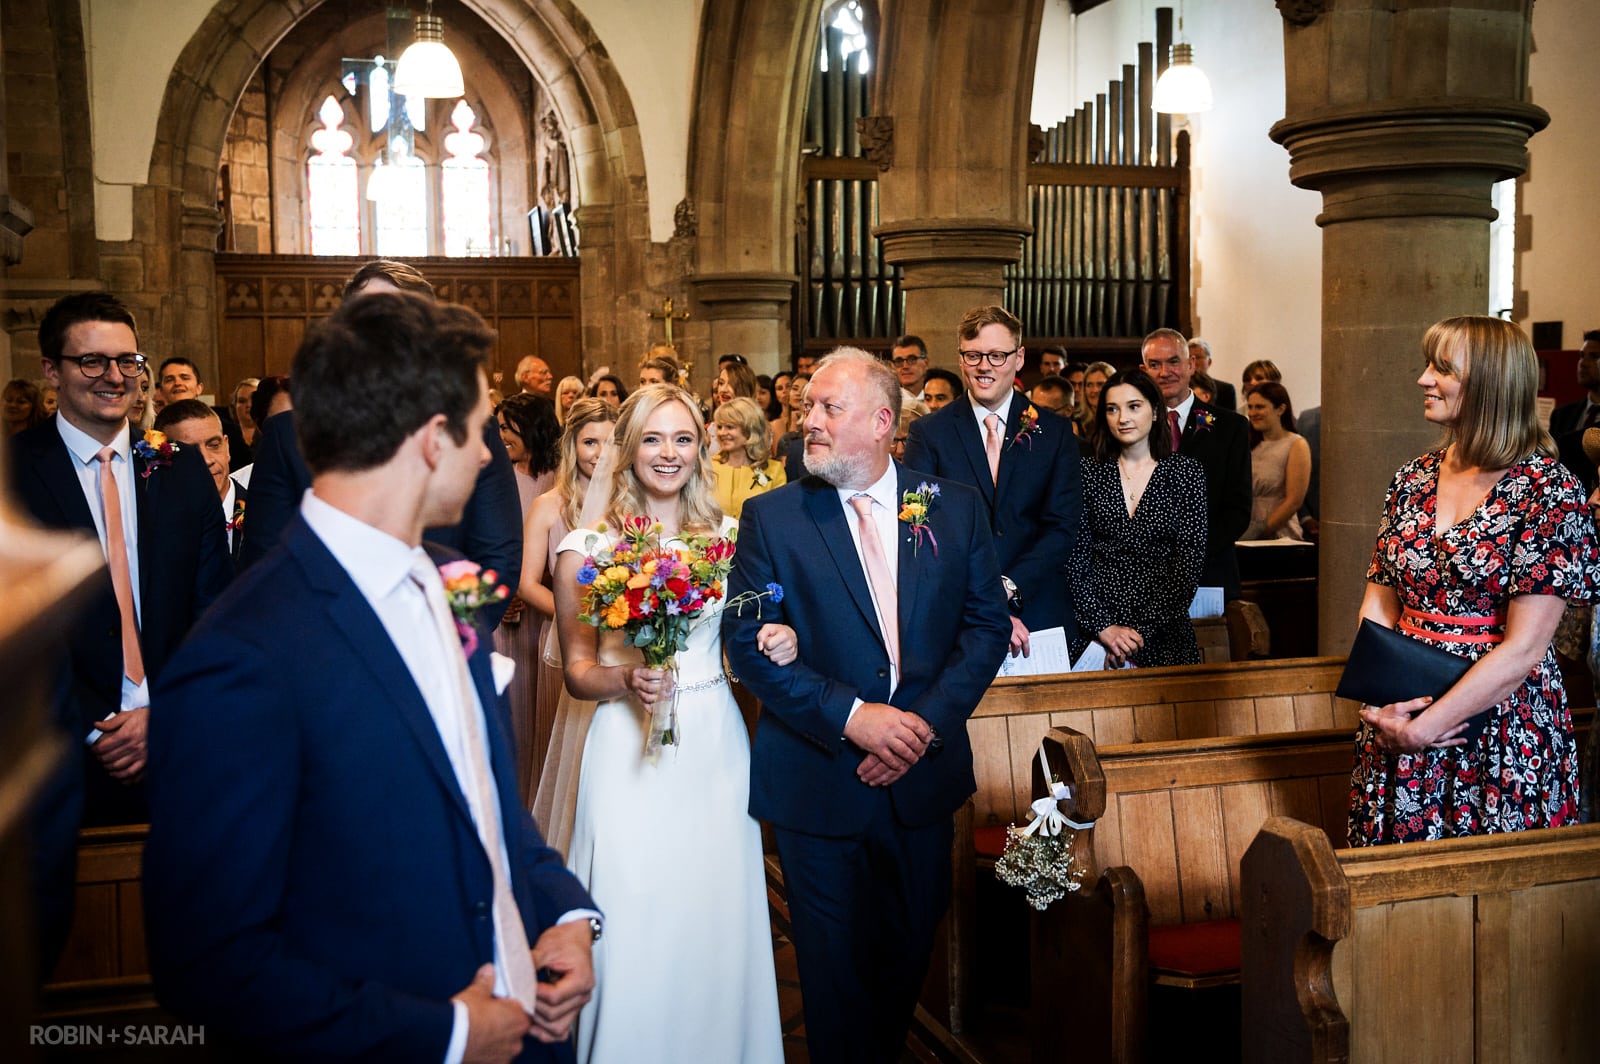 Bride and dad enter church as groom and guests watch